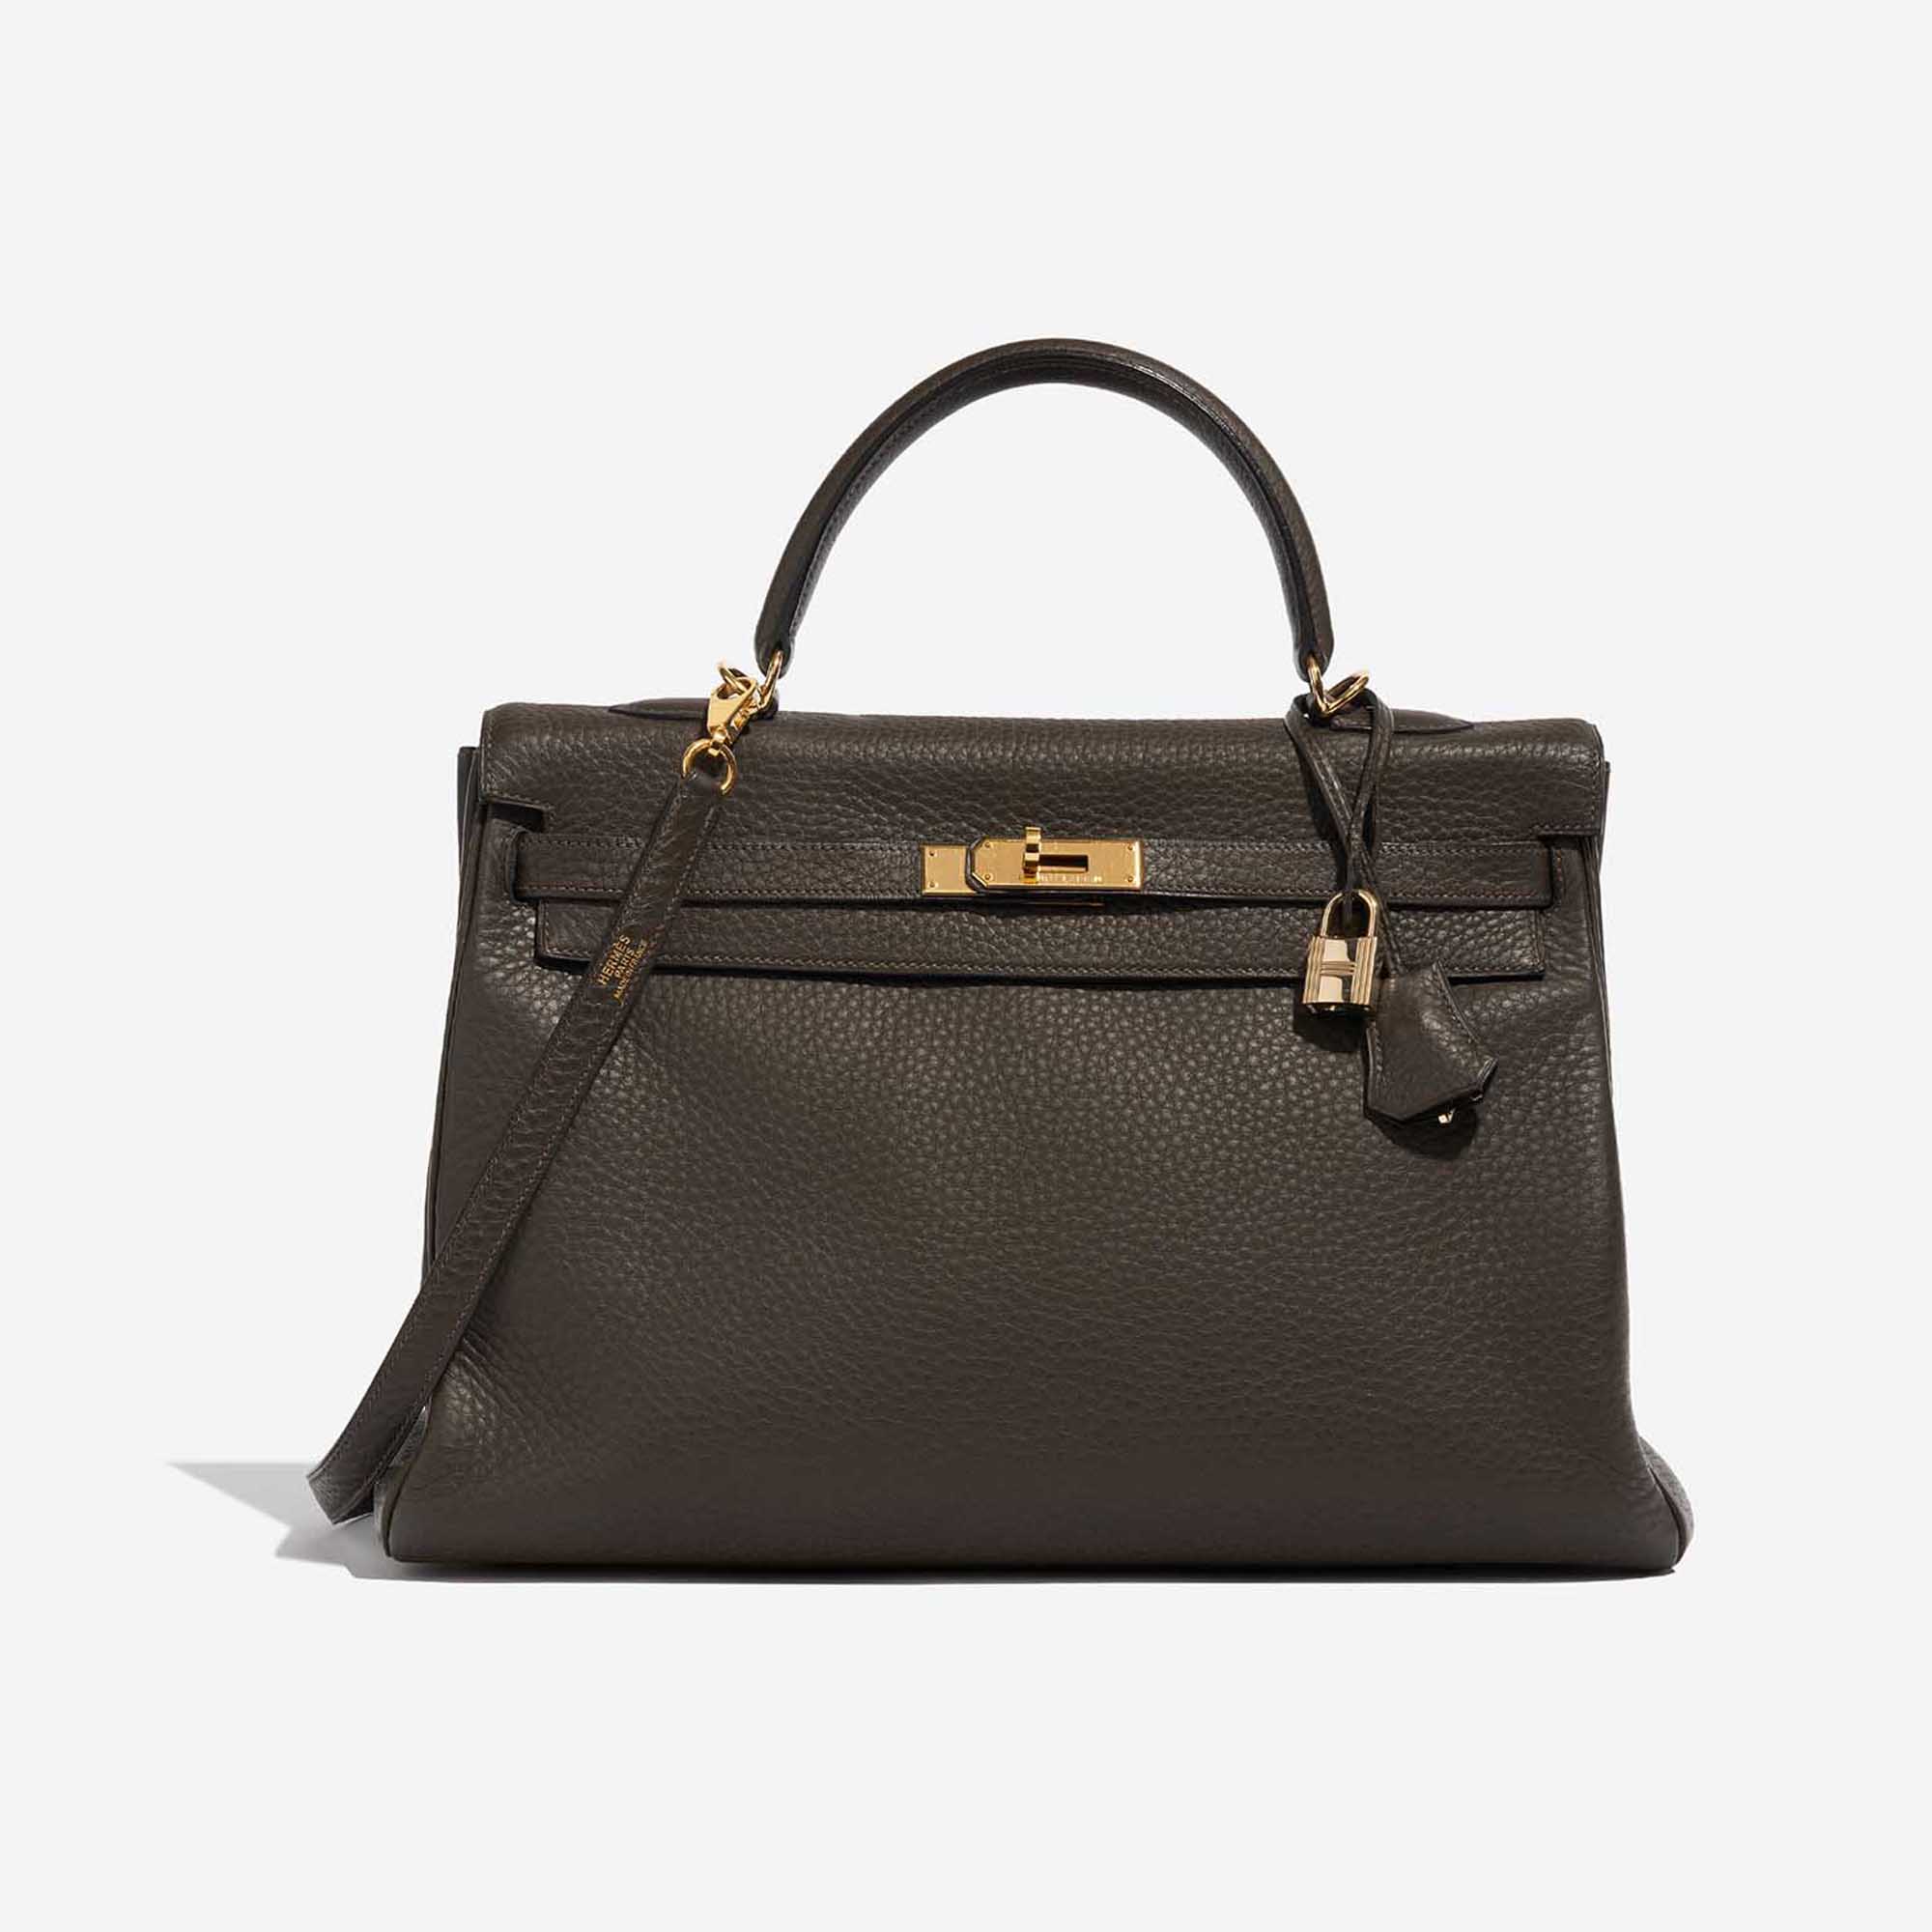 Pre-owned Hermès bag Kelly 35 Togo Chocolate Brown Front | Sell your designer bag on Saclab.com